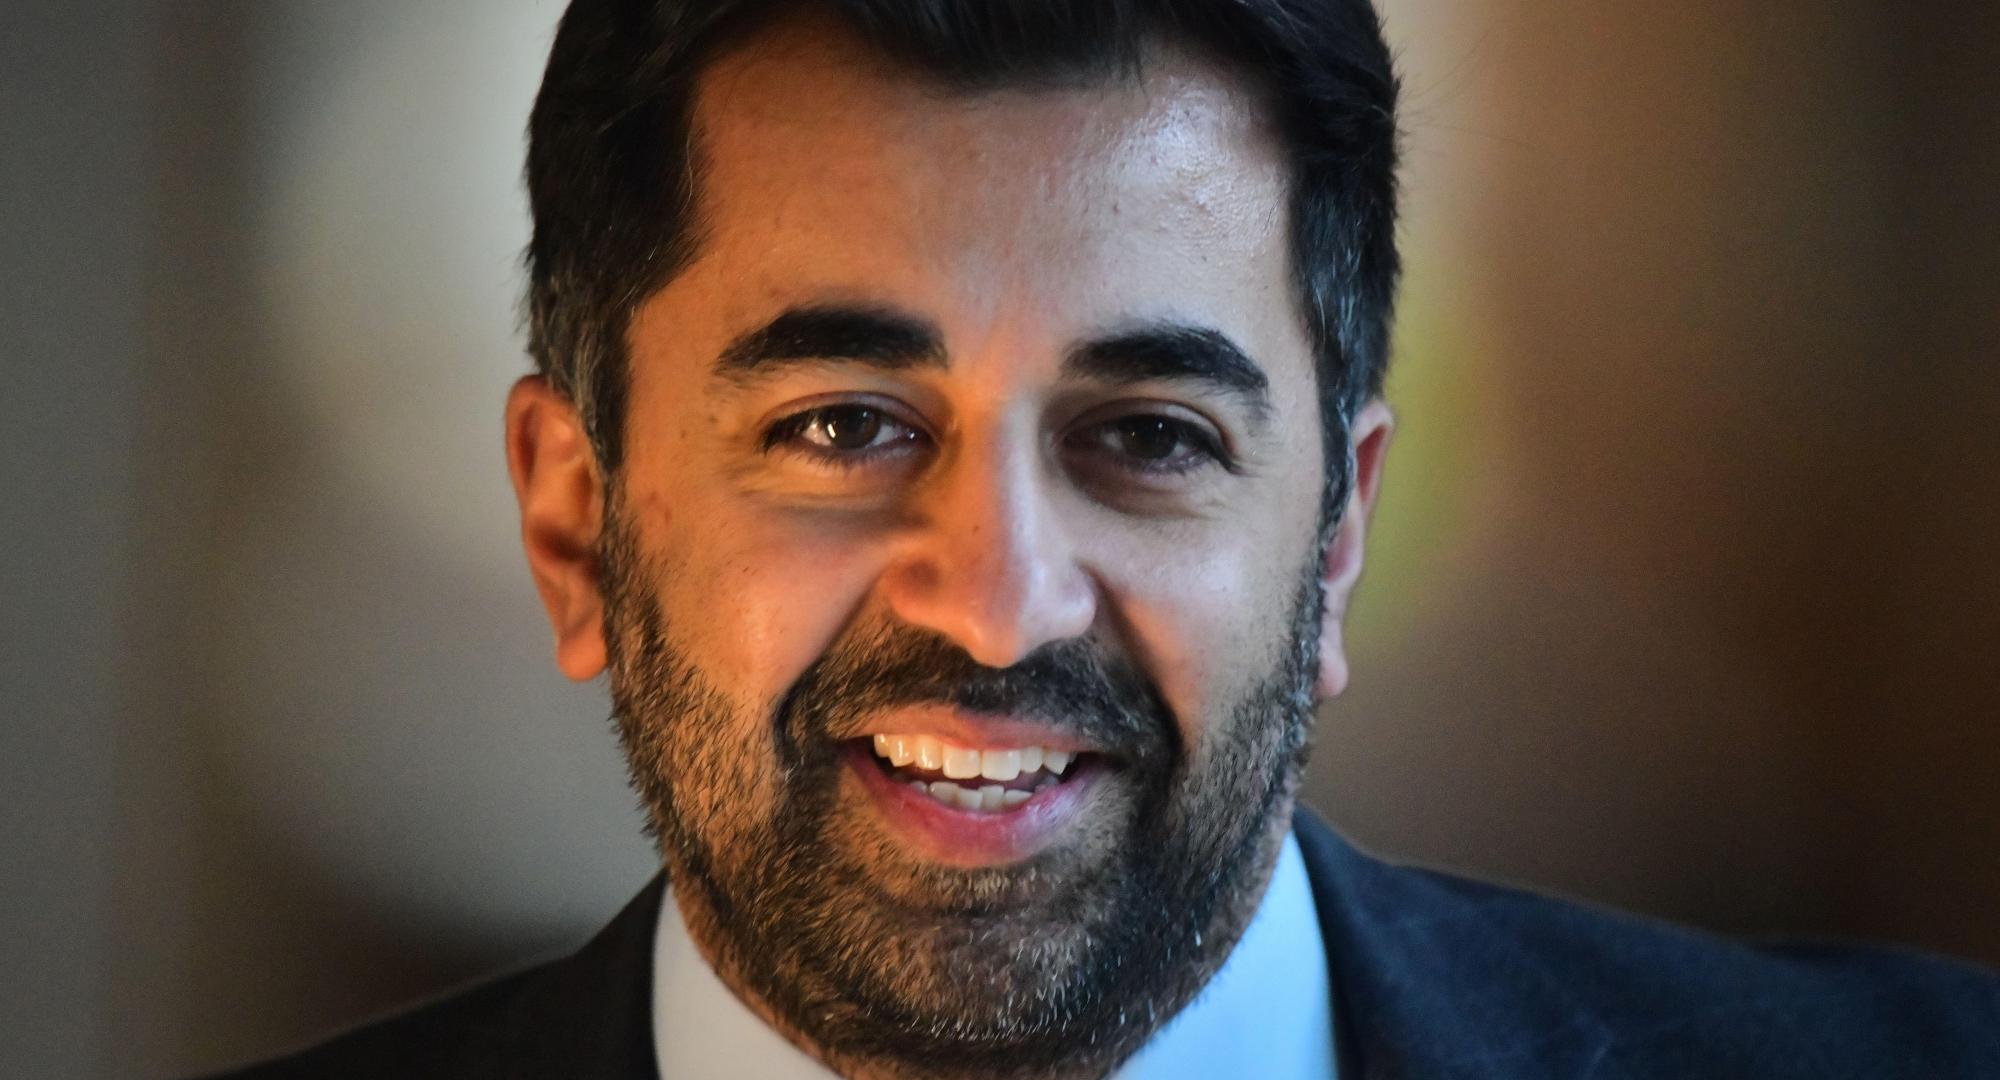 Humza Yousaf, new leader of the SNP